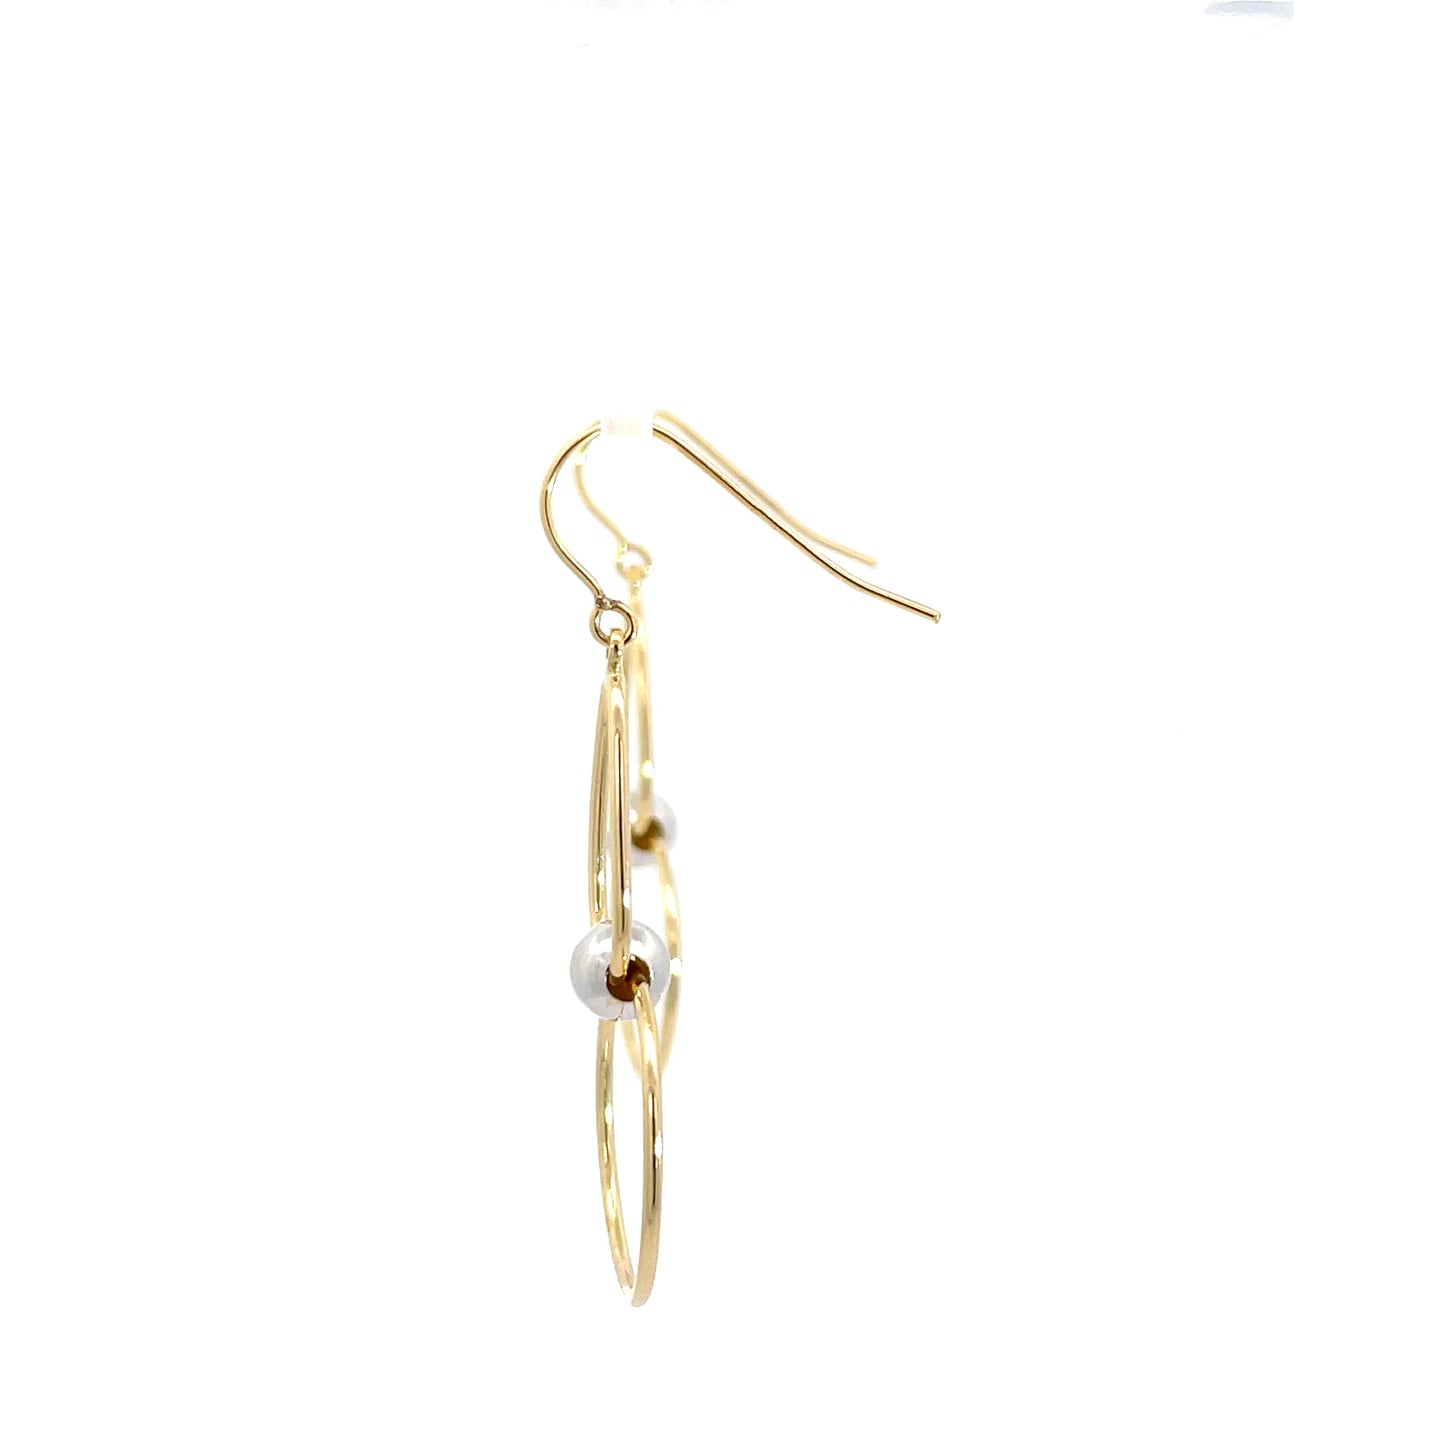 9ct Yellow Gold and Silver Drop Earrings